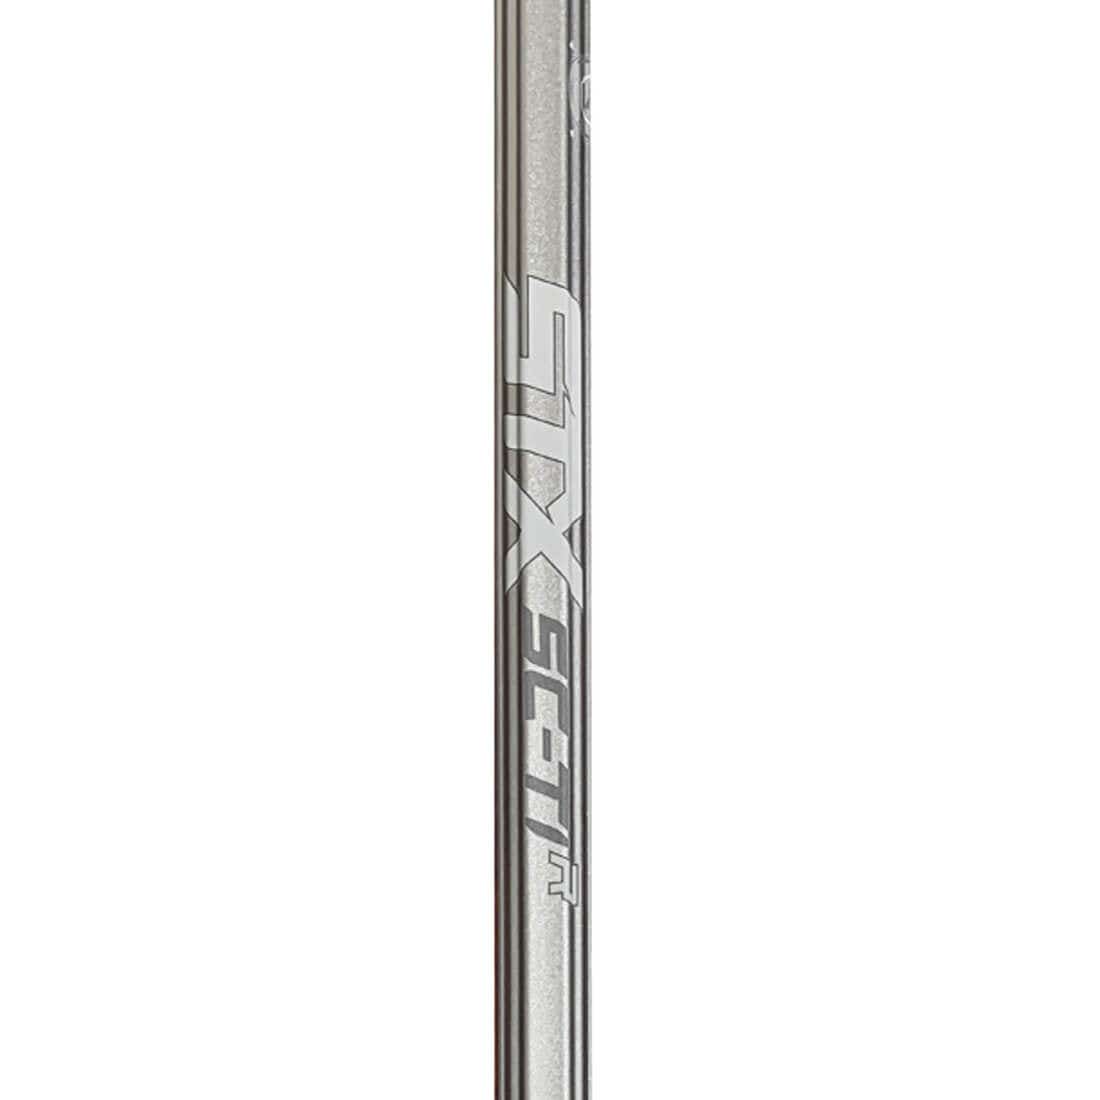 NEW STX SC-TI S Lacrosse Attack Shaft 30" Various Colors 